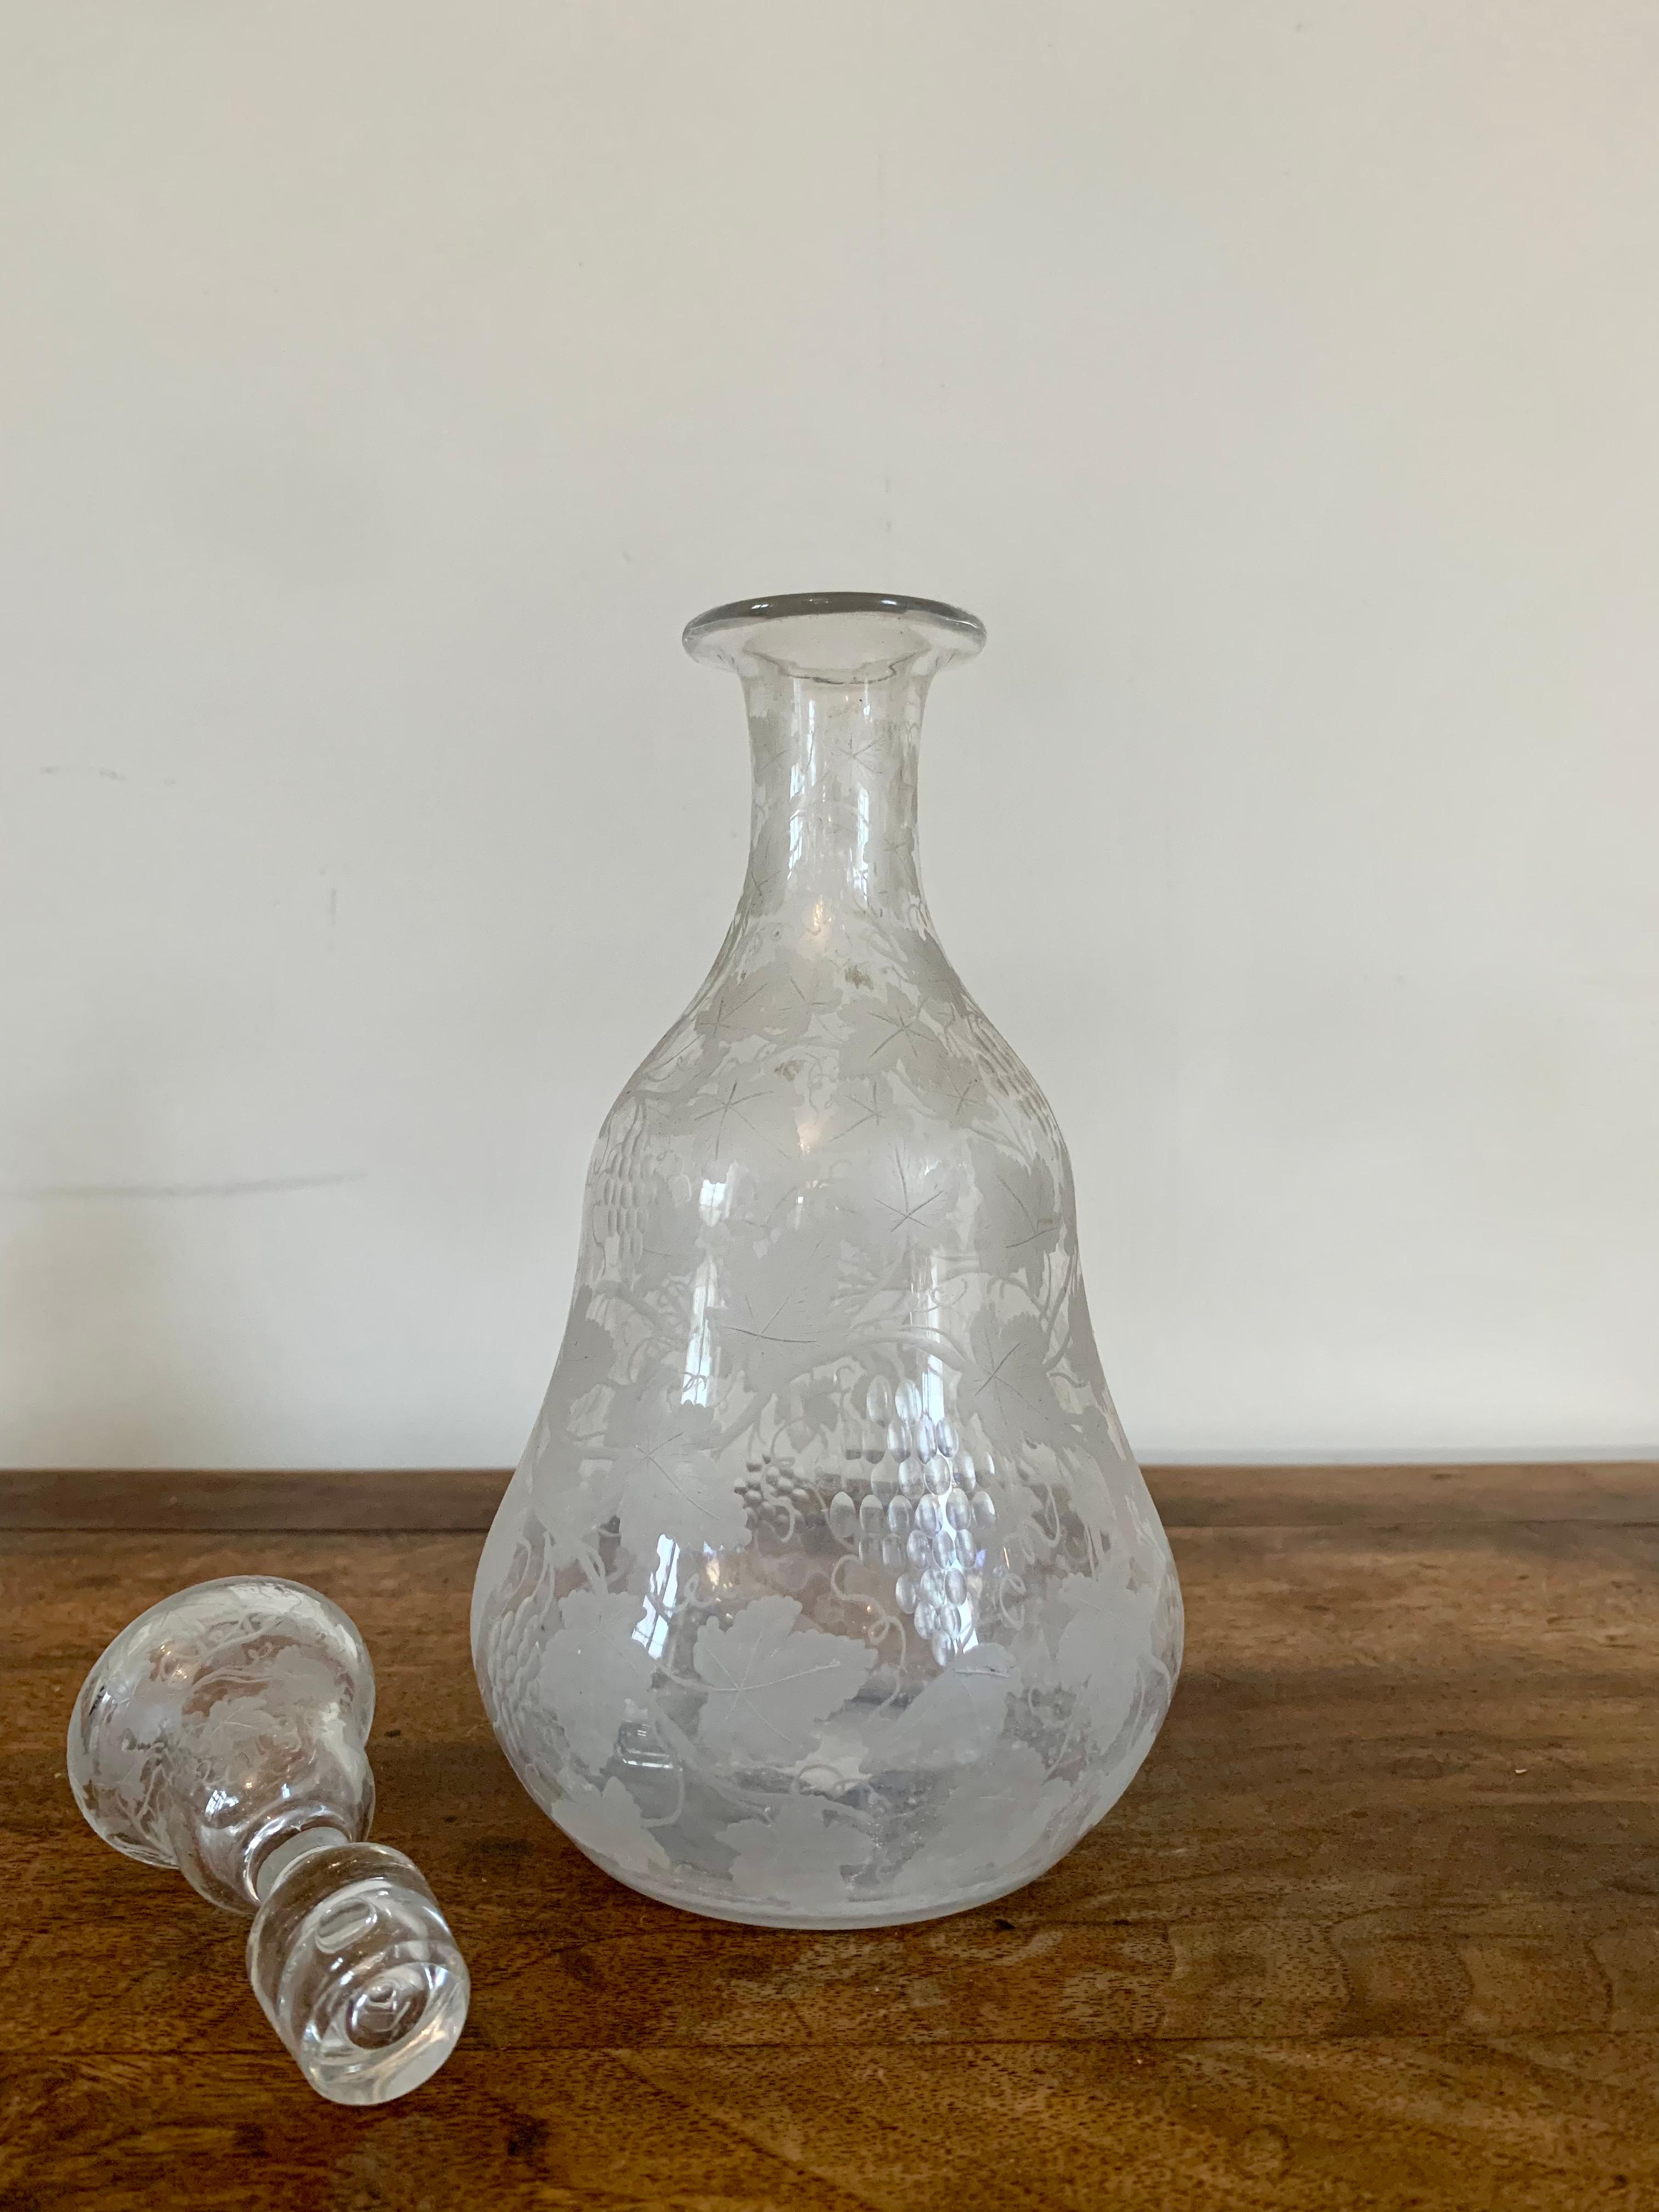  Crystal Decanter With Vine Decor Late 19th Century For Sale 3